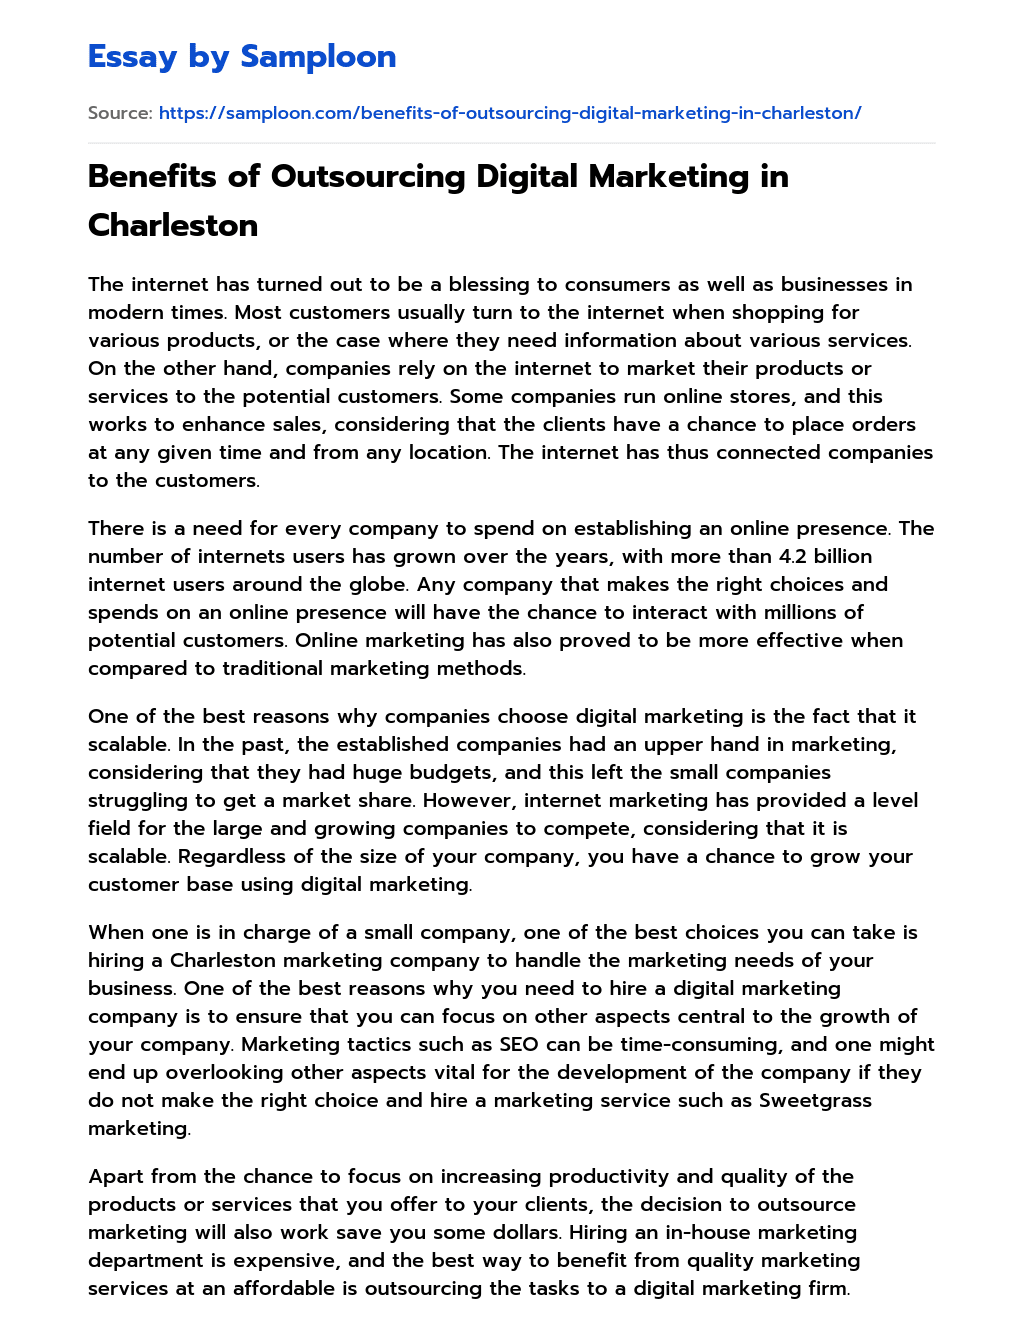 Benefits of Outsourcing Digital Marketing in Charleston essay